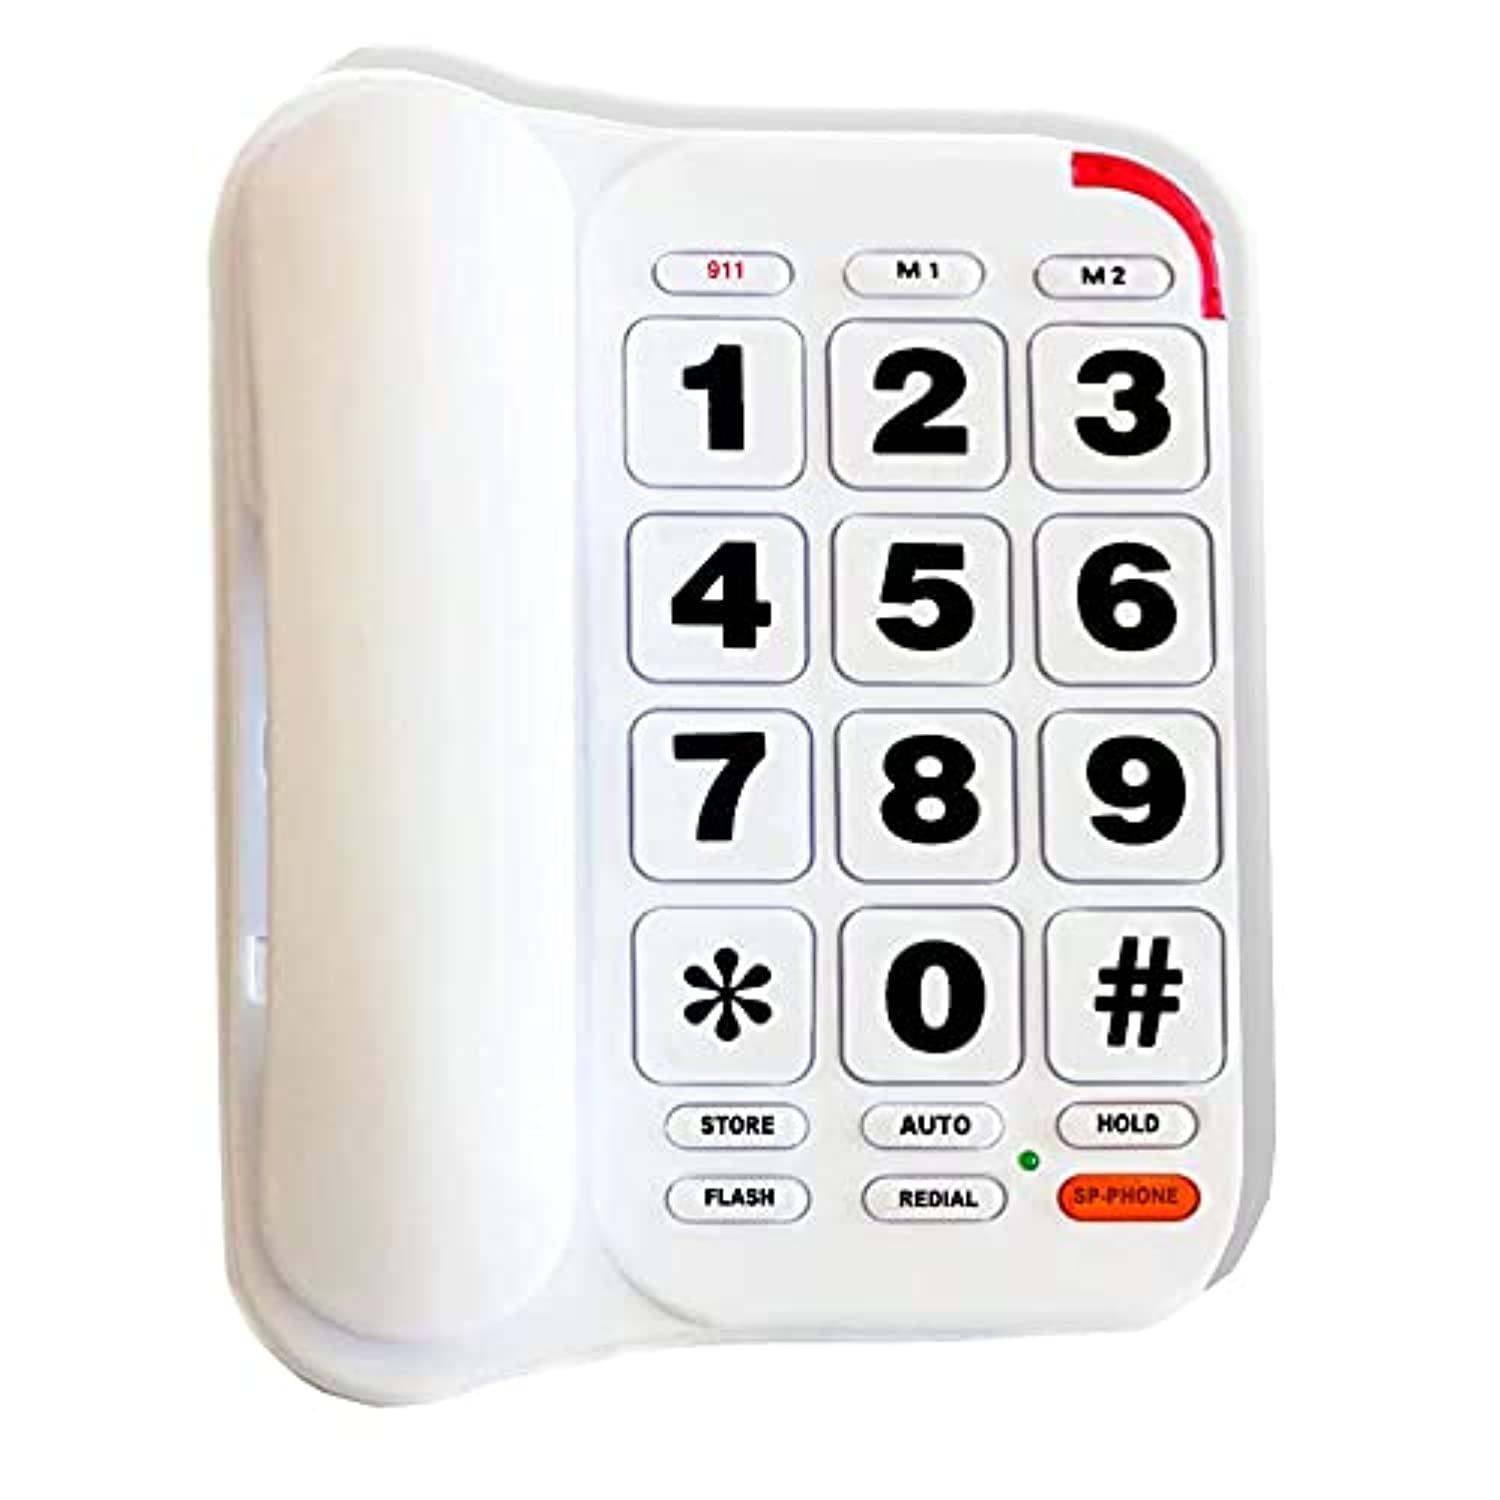 hepester large button phone for seniors, hepester p-46 amplified corded phone with speakerphone for elderly home landline phones wall 